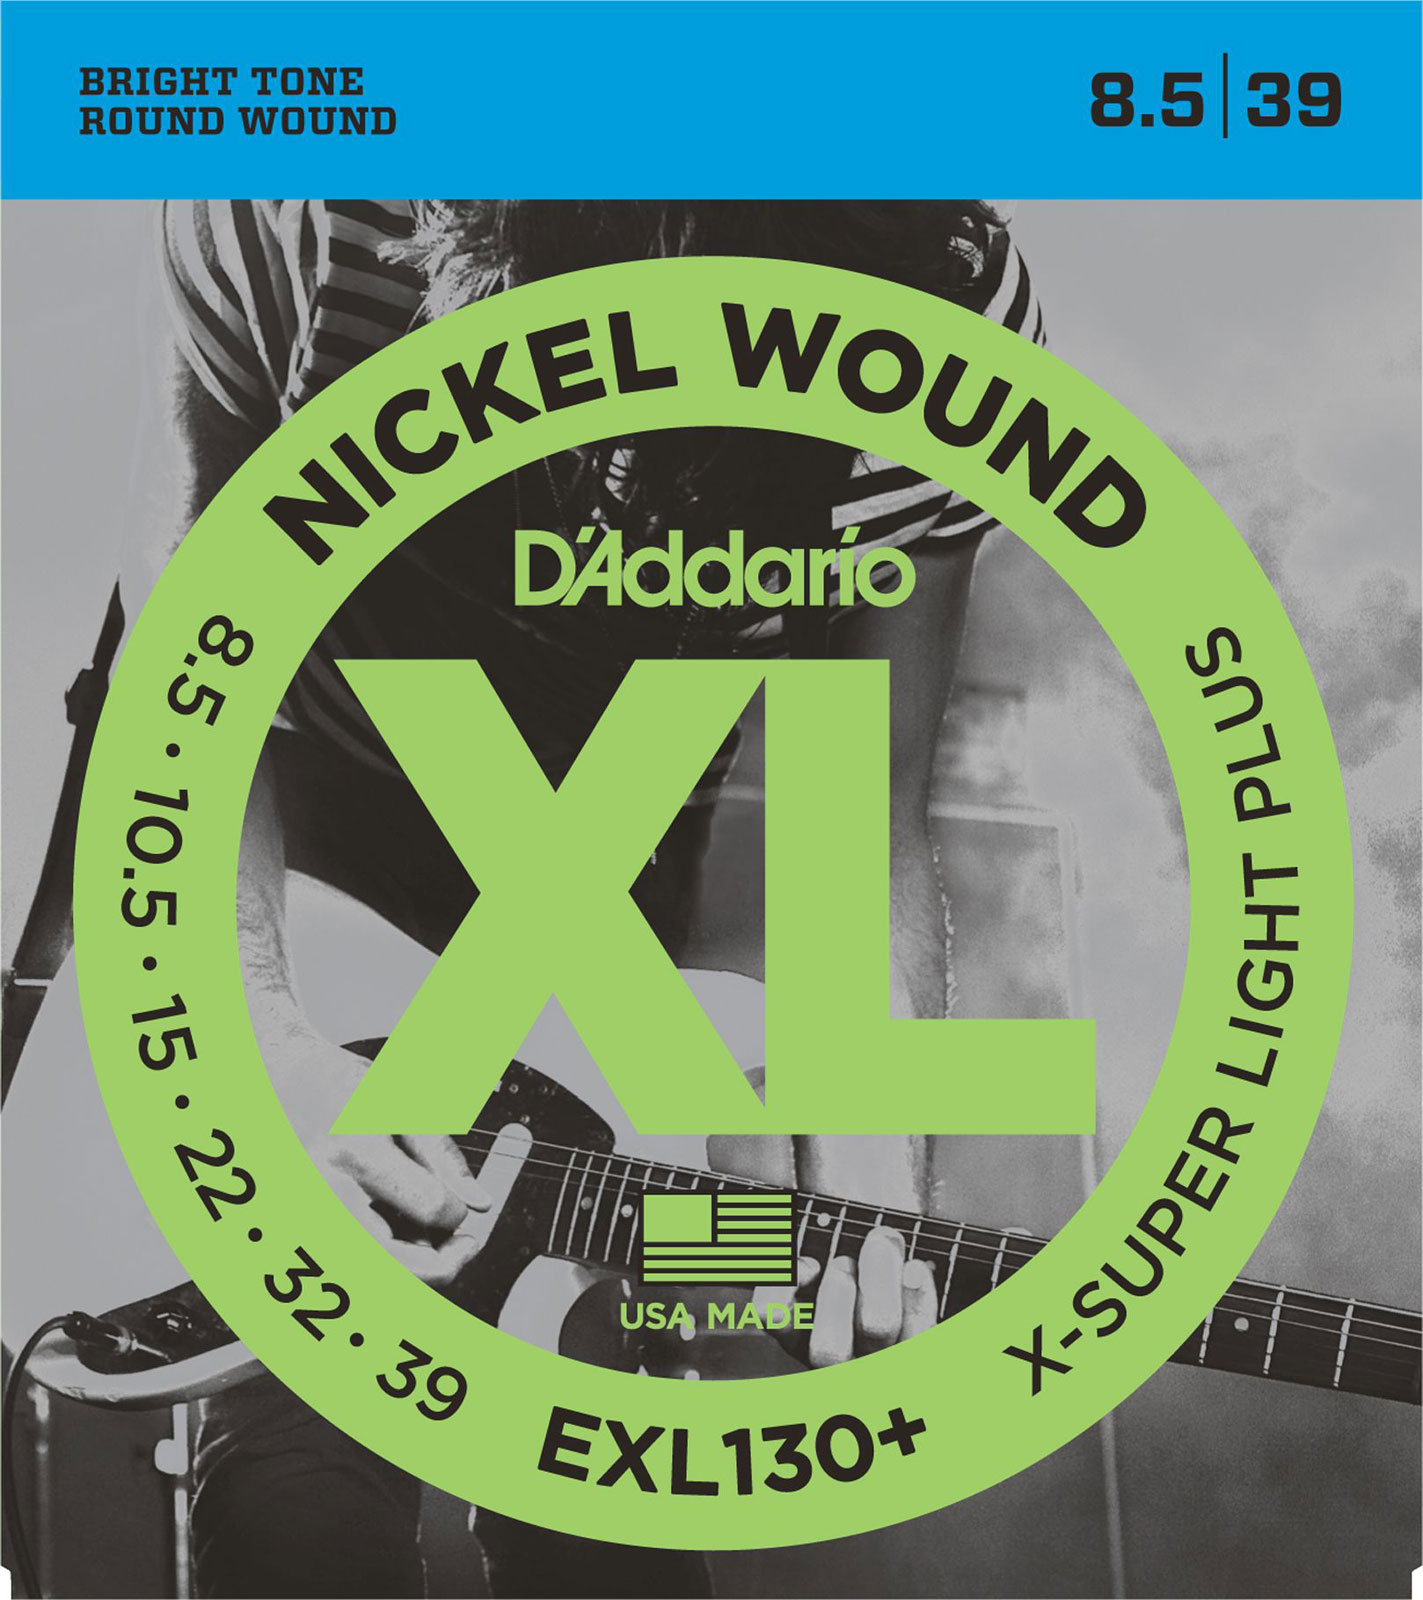 D'ADDARIO AND CO EXL130+ NICKEL WOUND ELECTRIC GUITAR STRINGS EXTRA-SUPER LIGHT PLUS 8.5-39